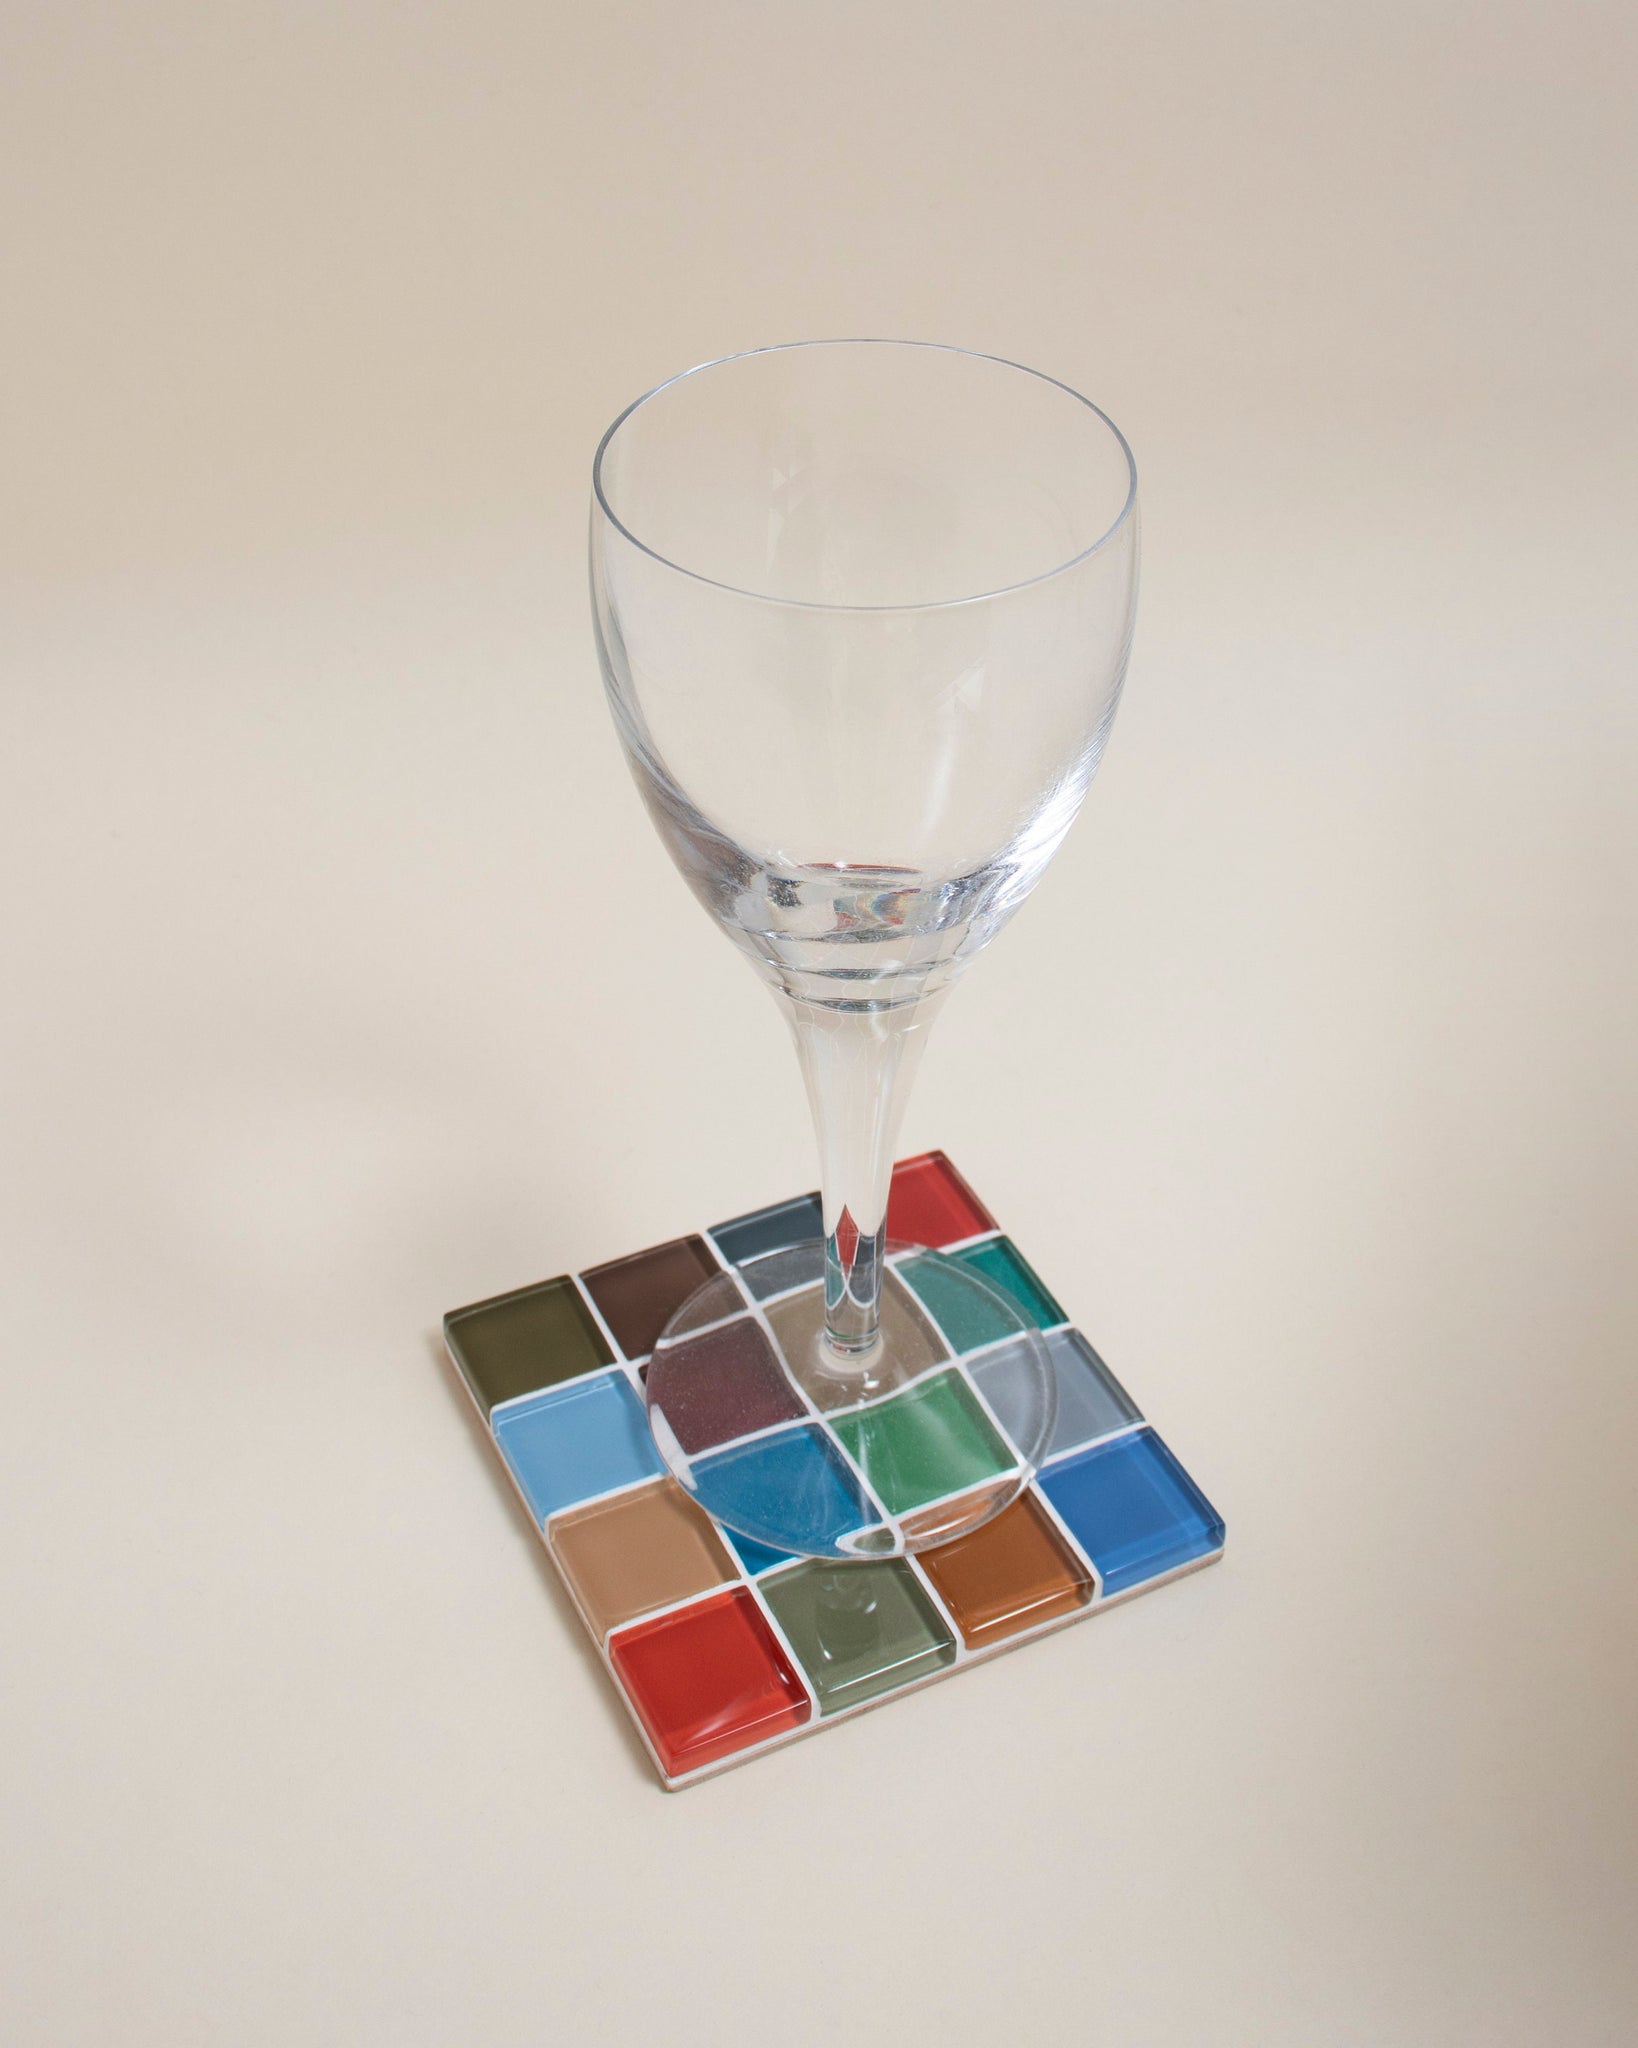 Glass Tile Coaster | Handmade Drink Coaster | Square Coaster | Housewarming Gift | Gift for Her | Thanksgiving Gifts | Christmas Gifts